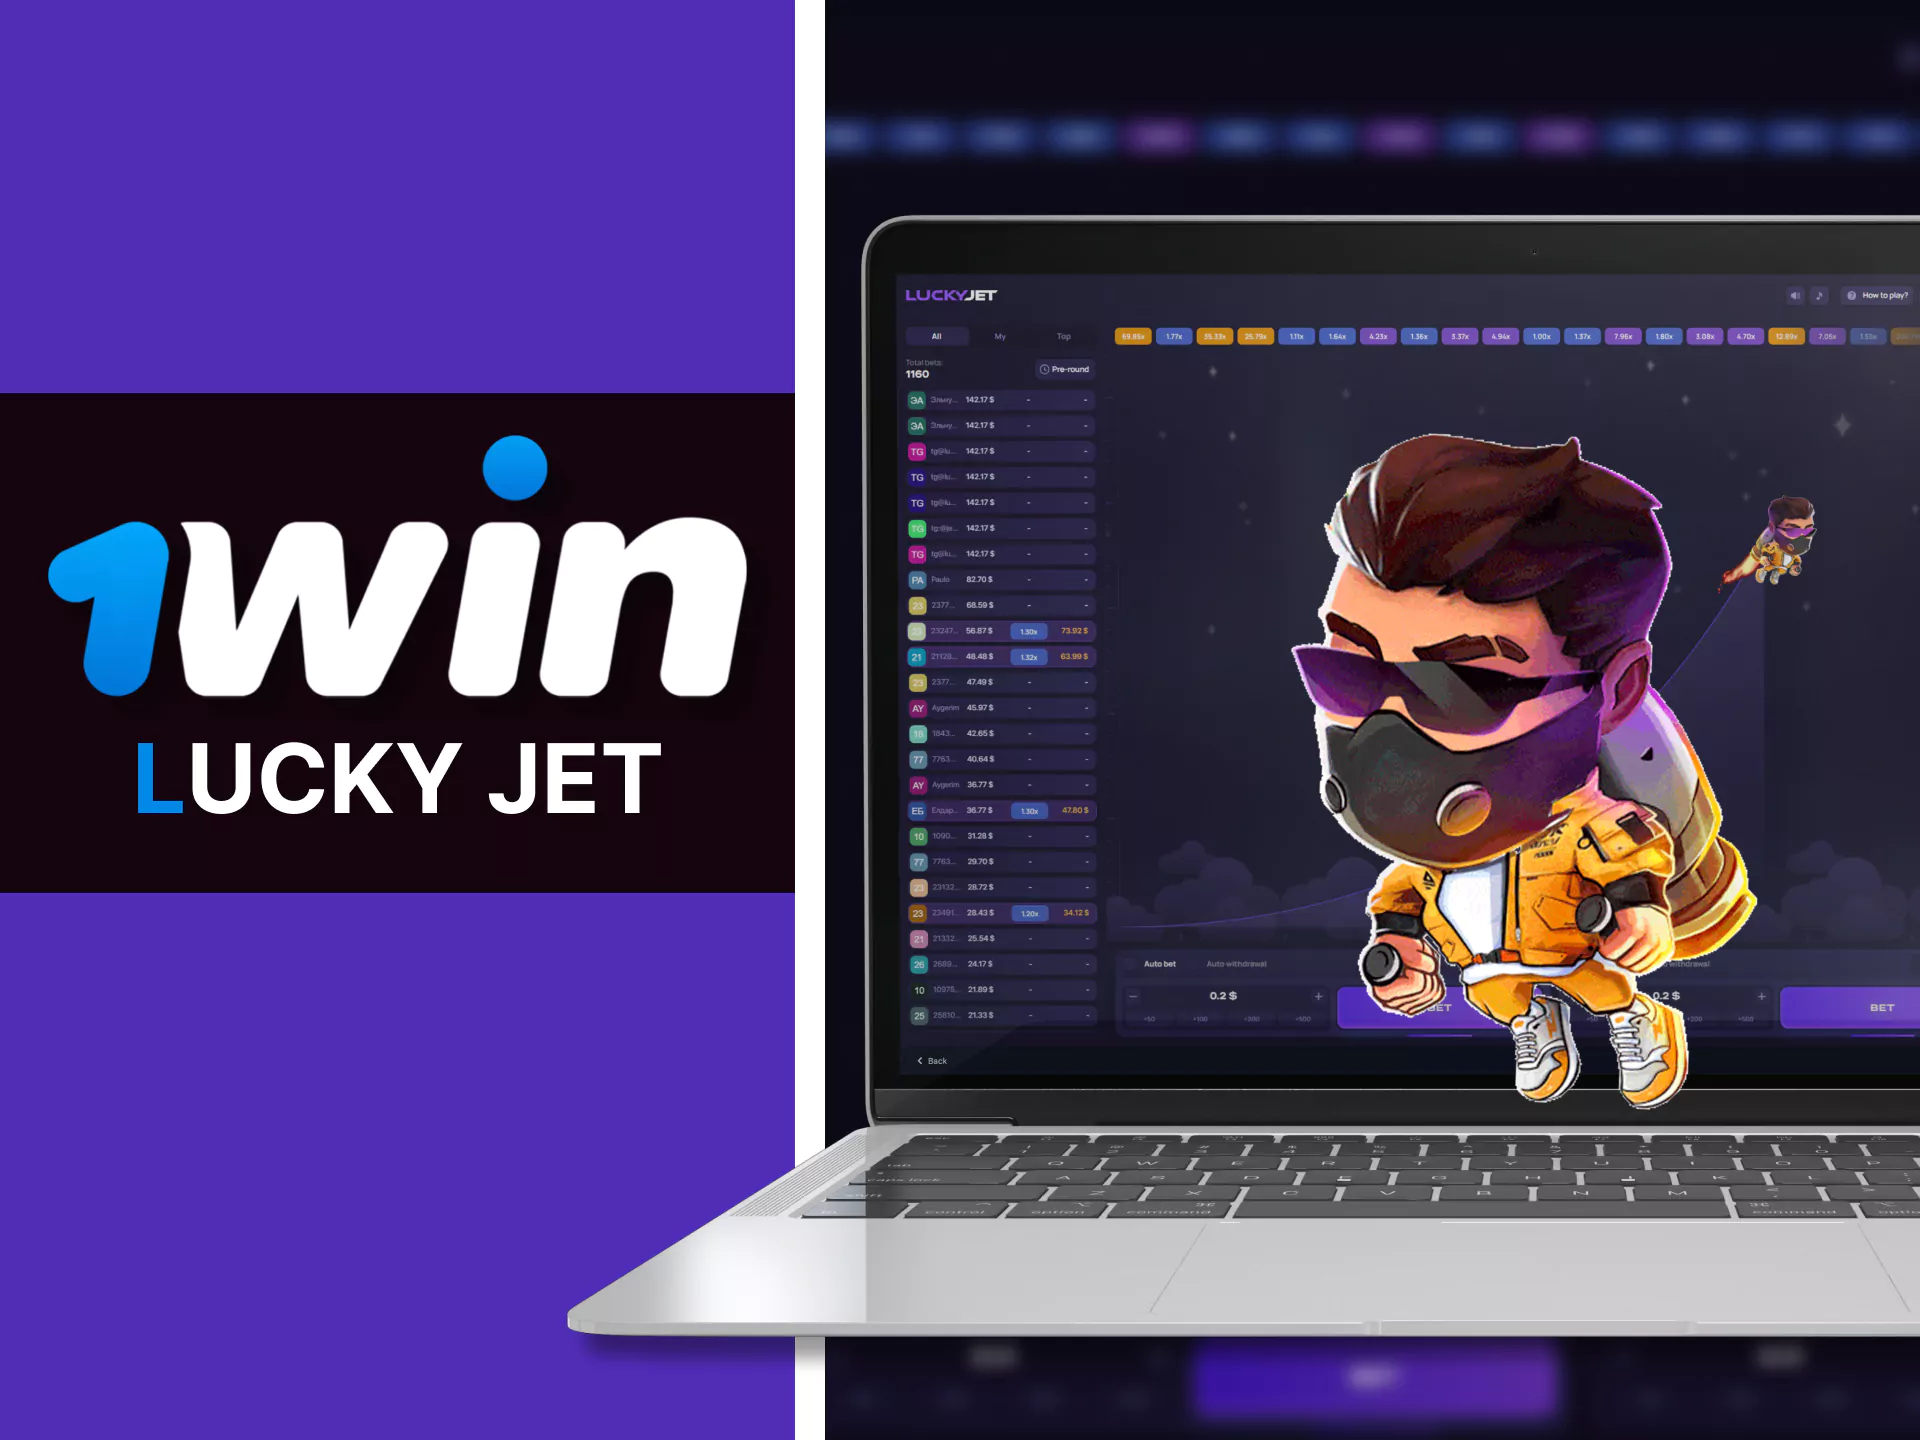 At 1win you have the opportunity to play Lucky Jet.